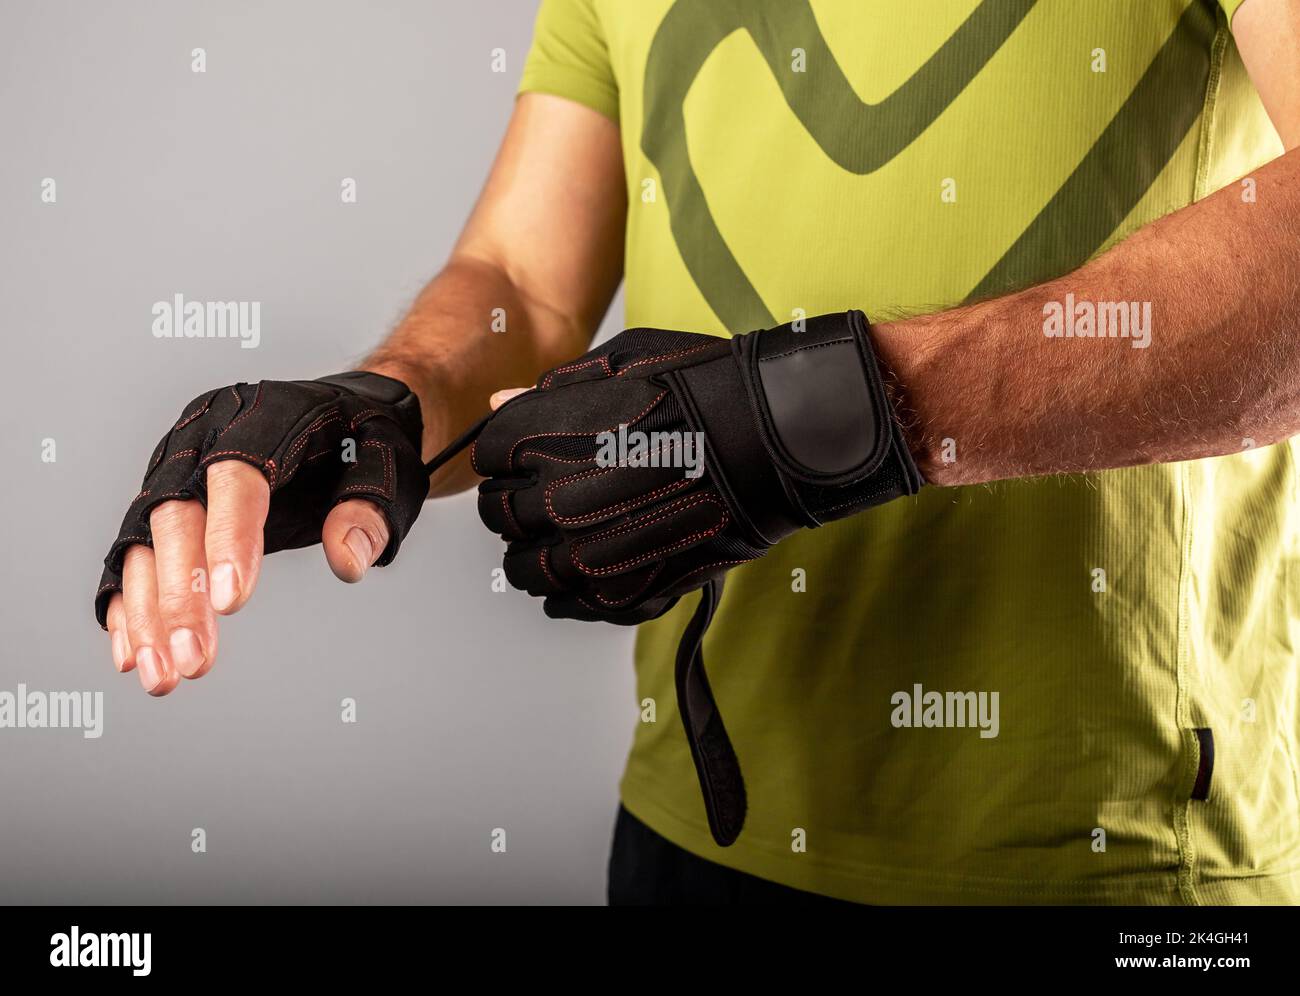 Wearing, putting on sport workout gloves close up for palm and wrist protection in gym. photo Stock Photo